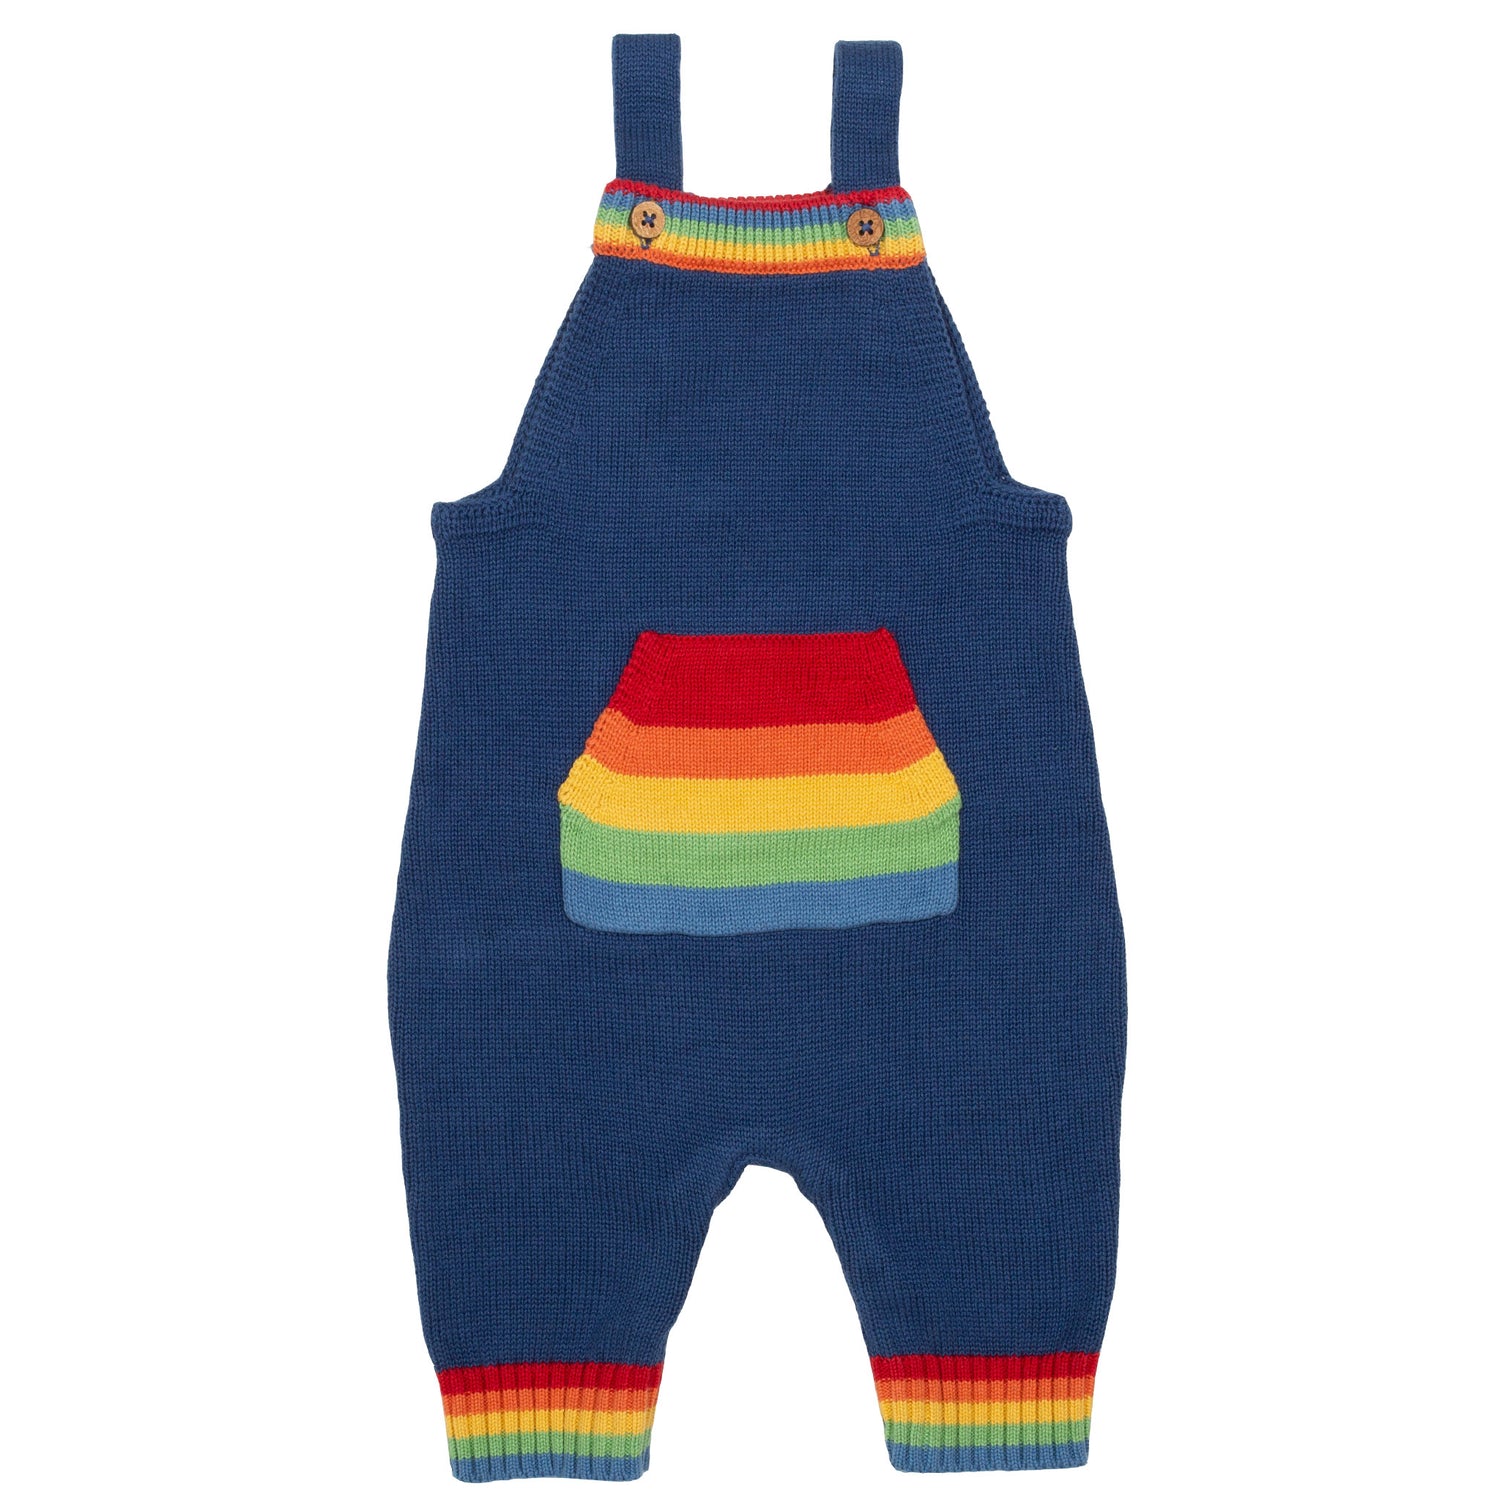 Blue knitted dungarees with rainbow pocket